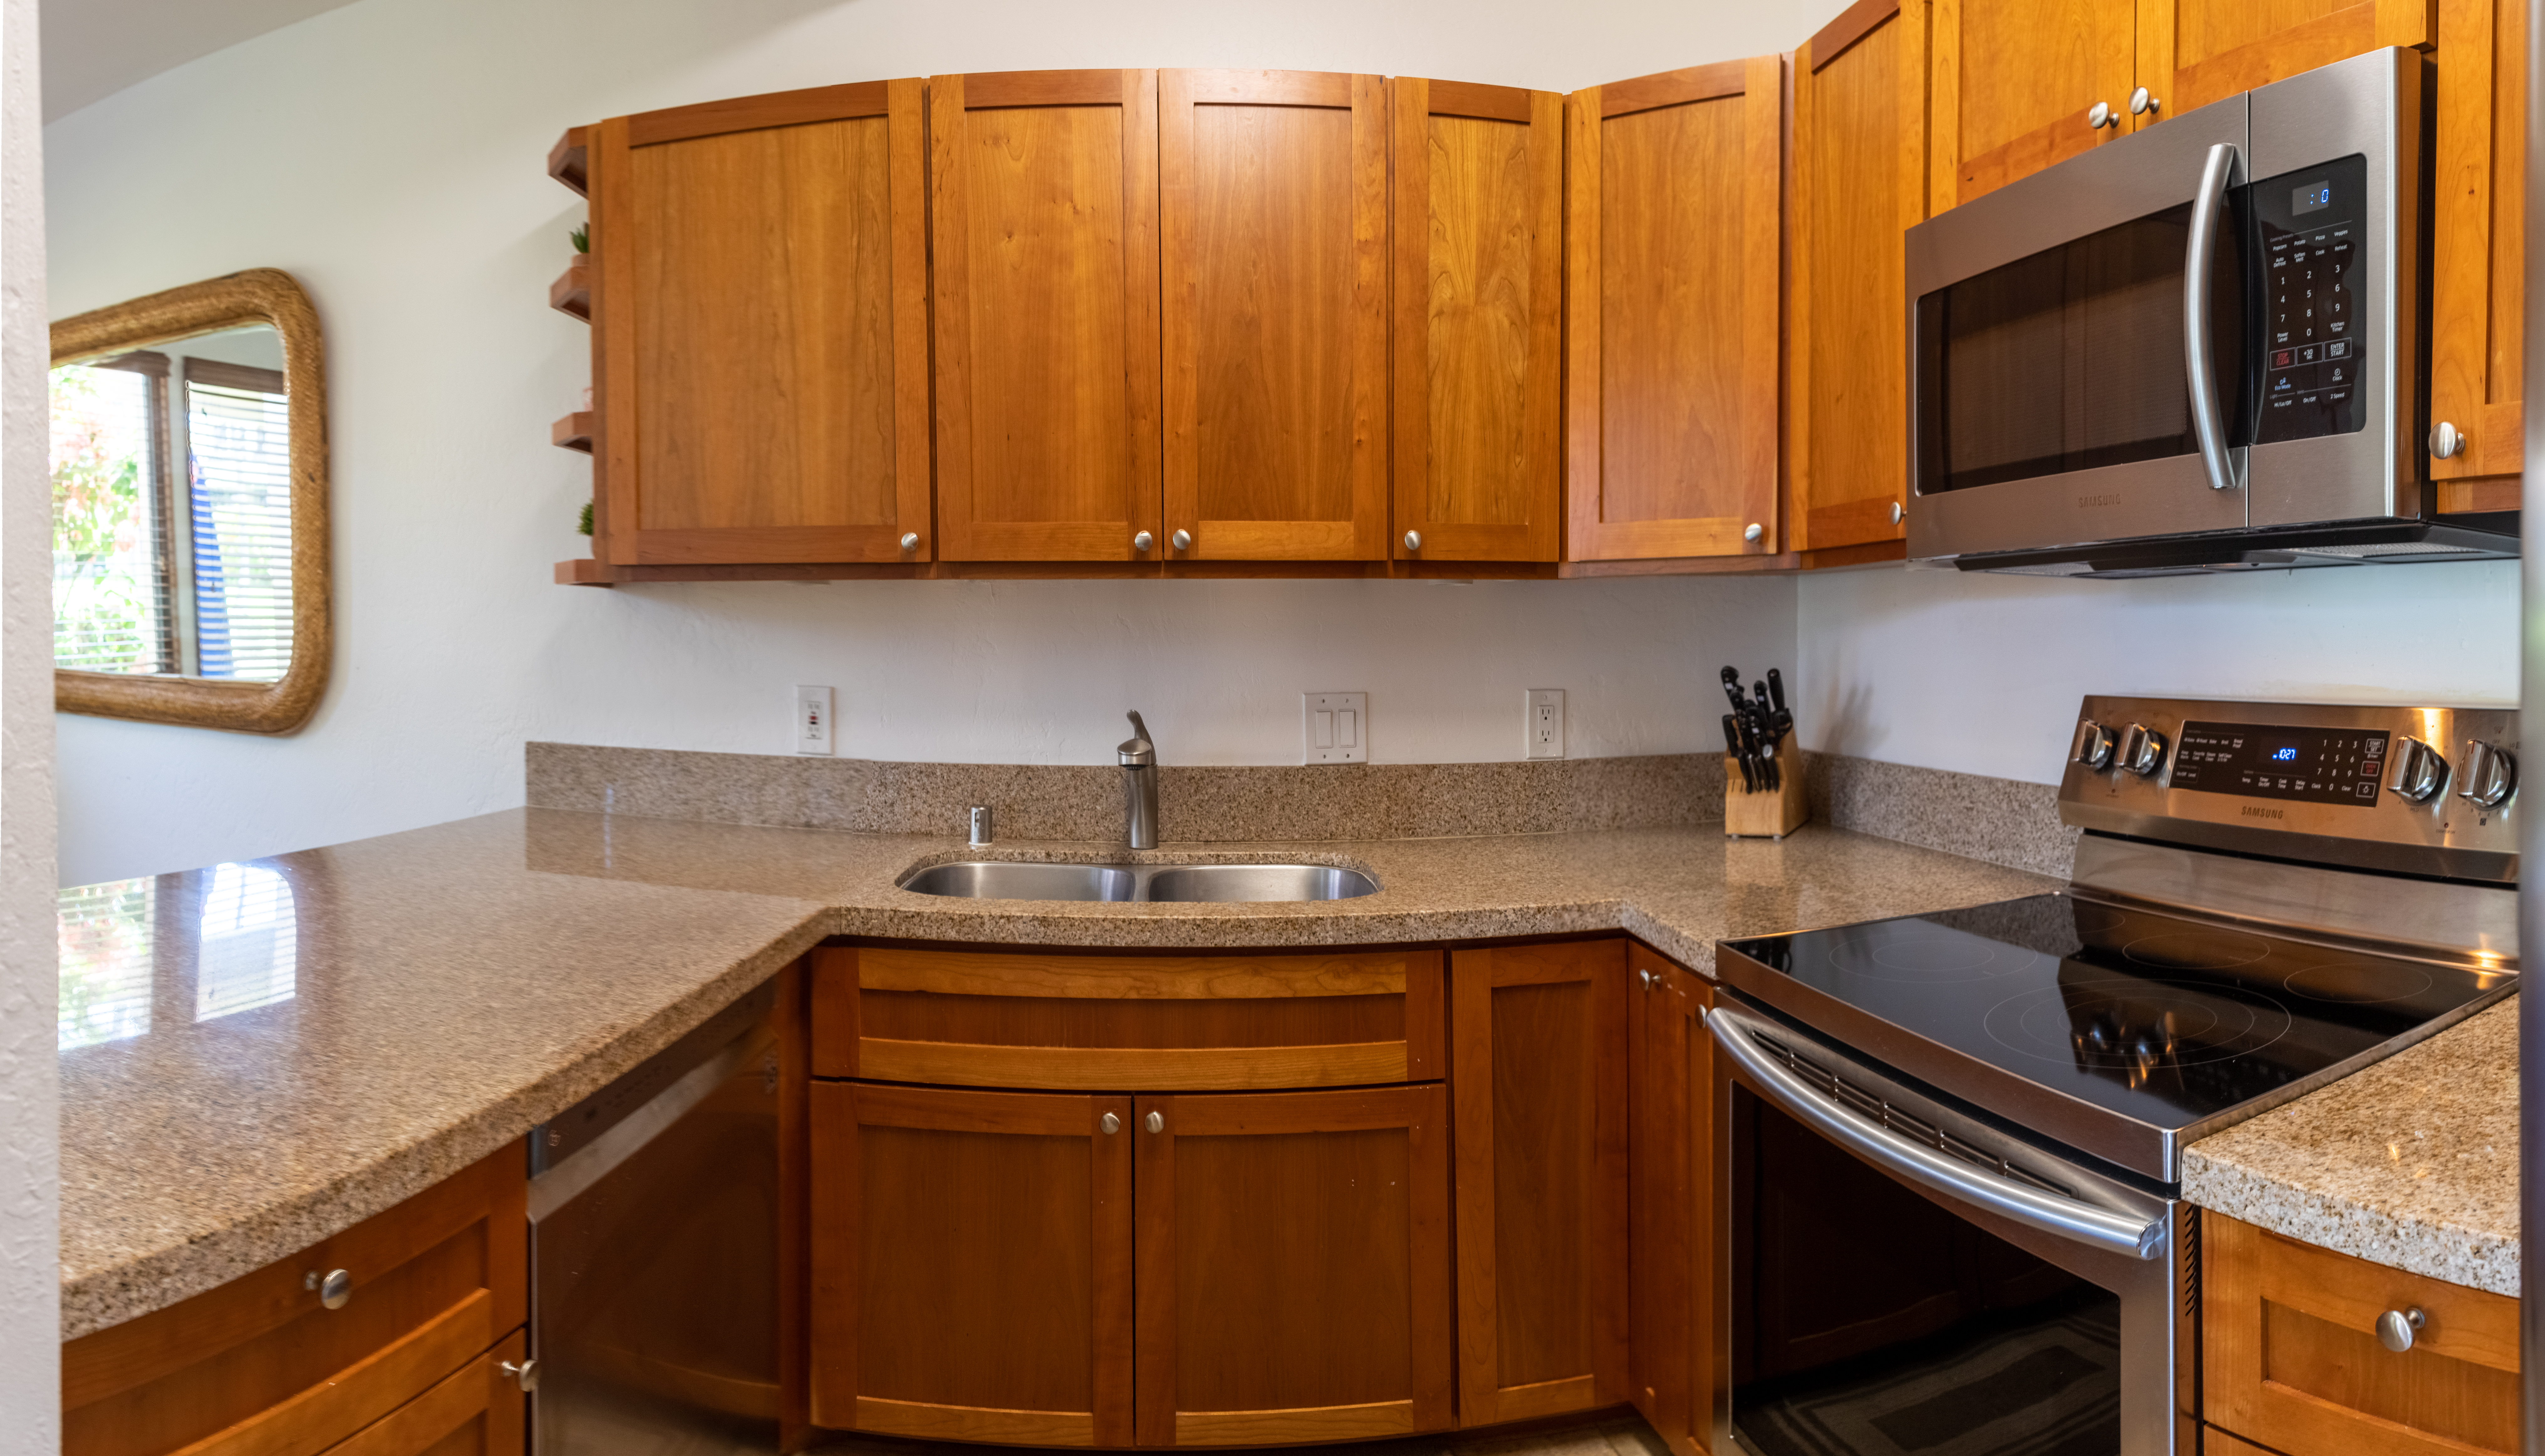 Full kitchen with oven and glass electric cooktop, microwave, double sink, dishwasher and full refrigerator allow you all the comforts of home and plenty of amenities to be able to cook whatever local food you find!